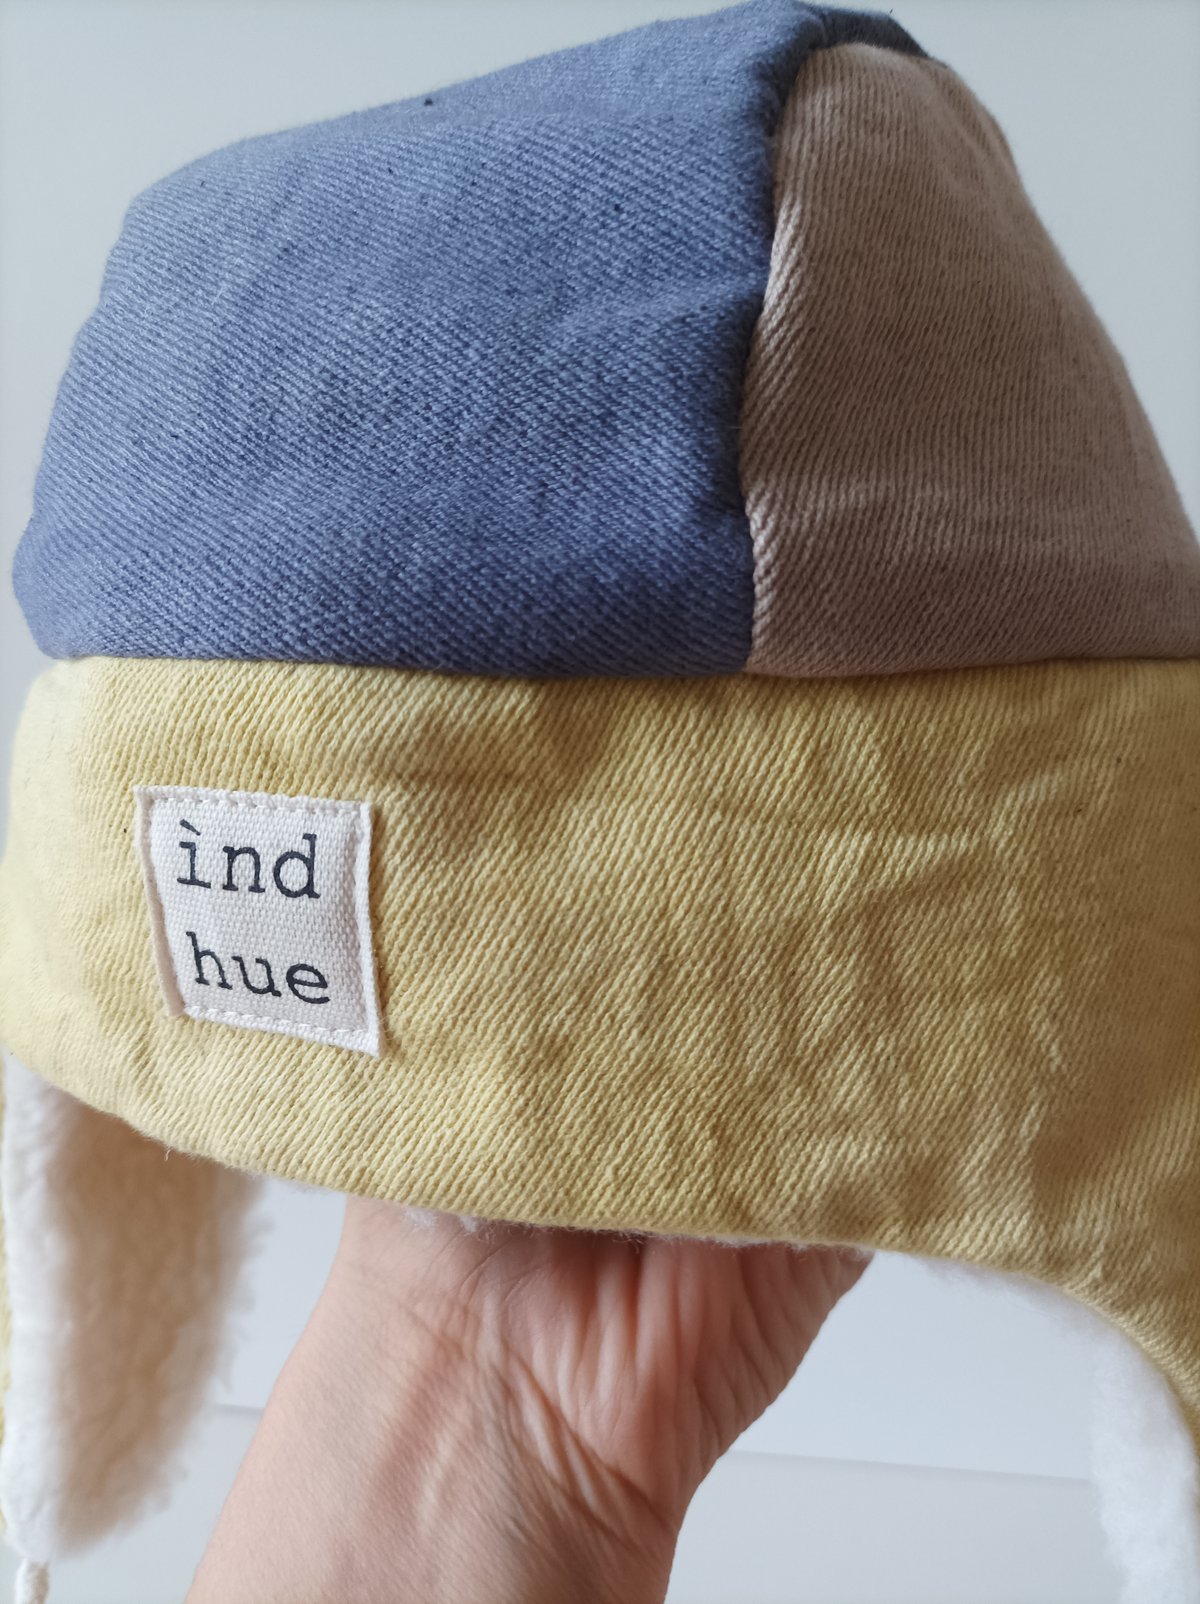 Image of "UNO PER TIPO"_ NATURALLY DYED HAT n 07